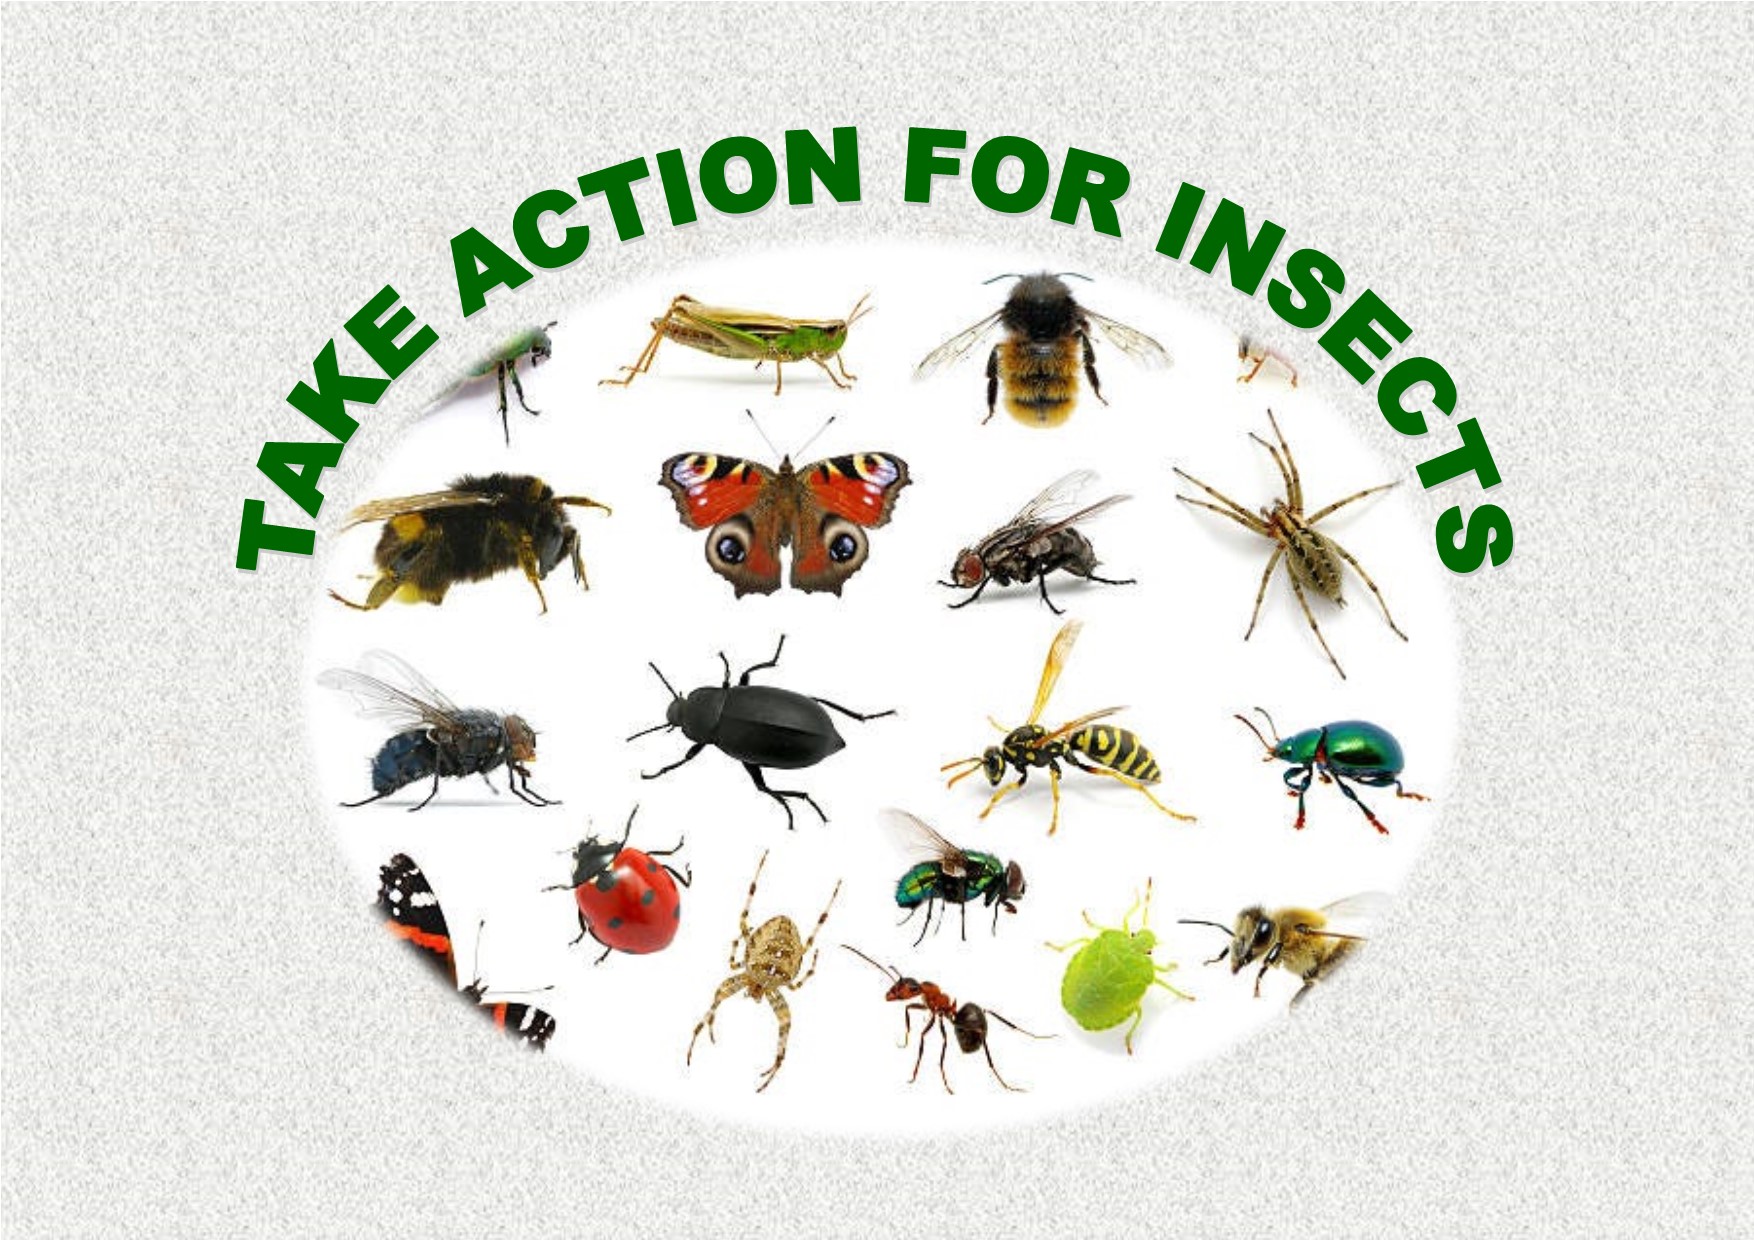 Ashington Town Council Approves Emergency Motion to Save Insects